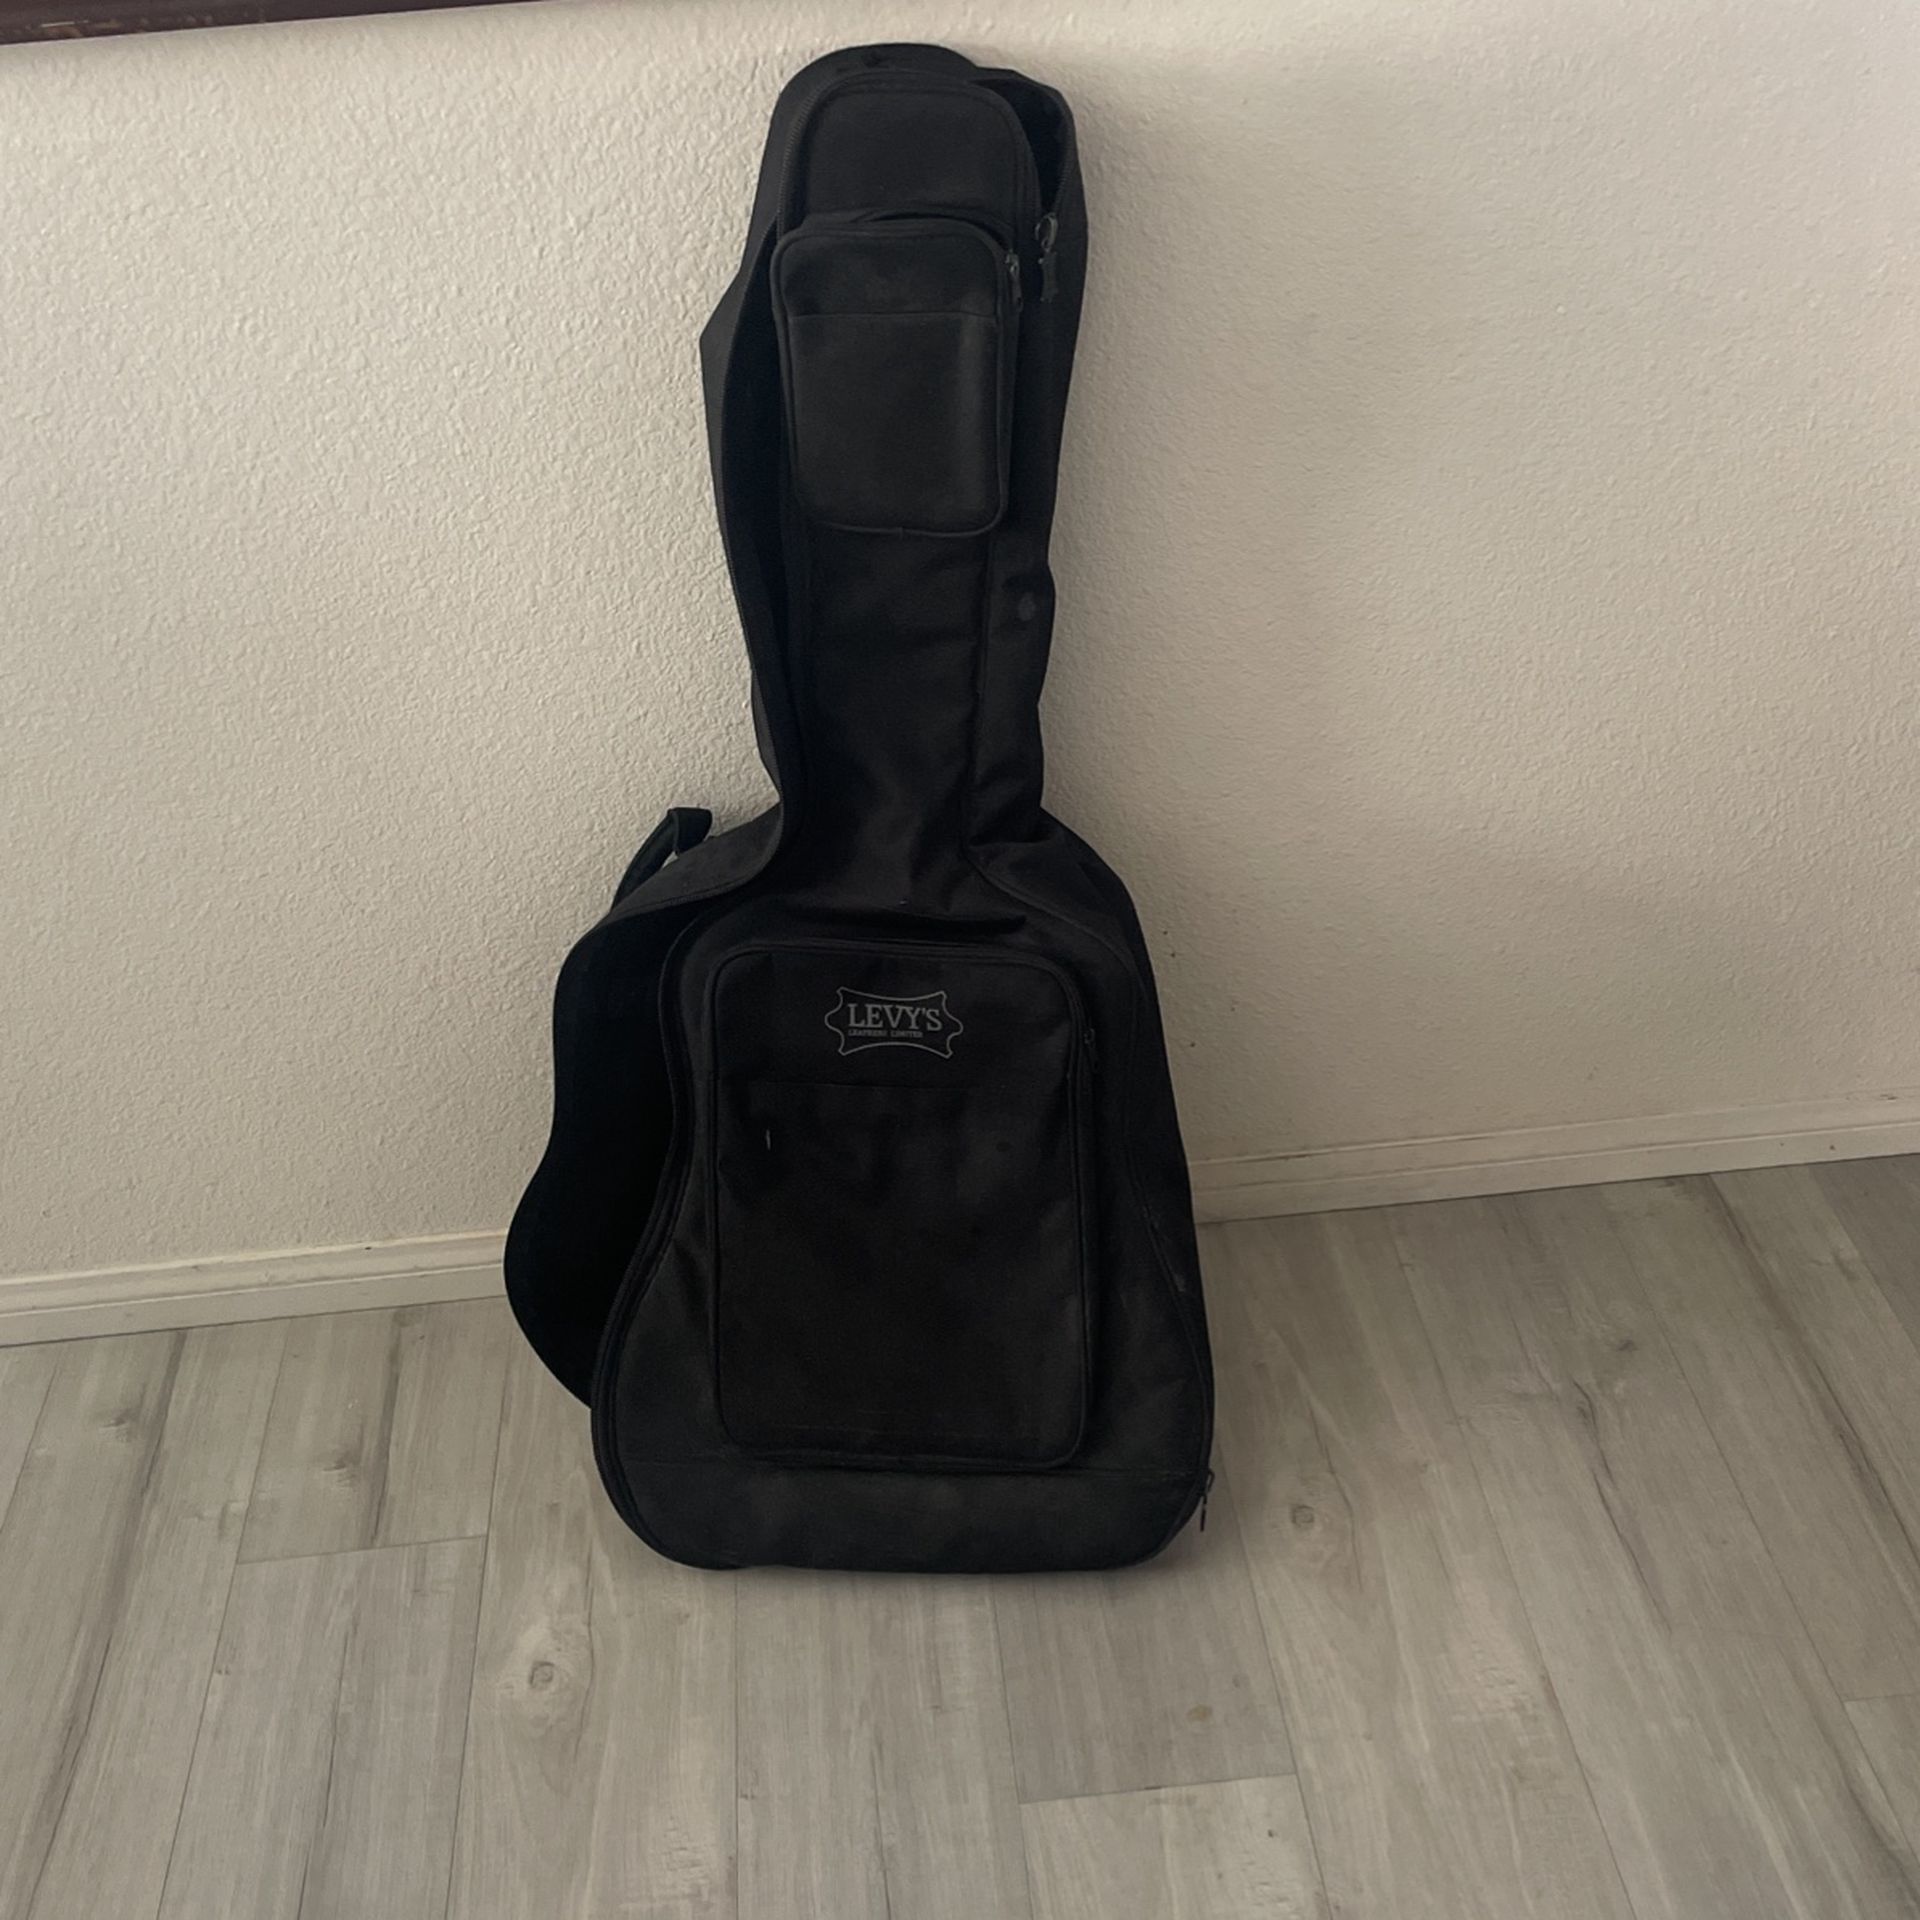 Levy's Leather Limited Acoustic Guitar Gig Bag & Small guitar bag